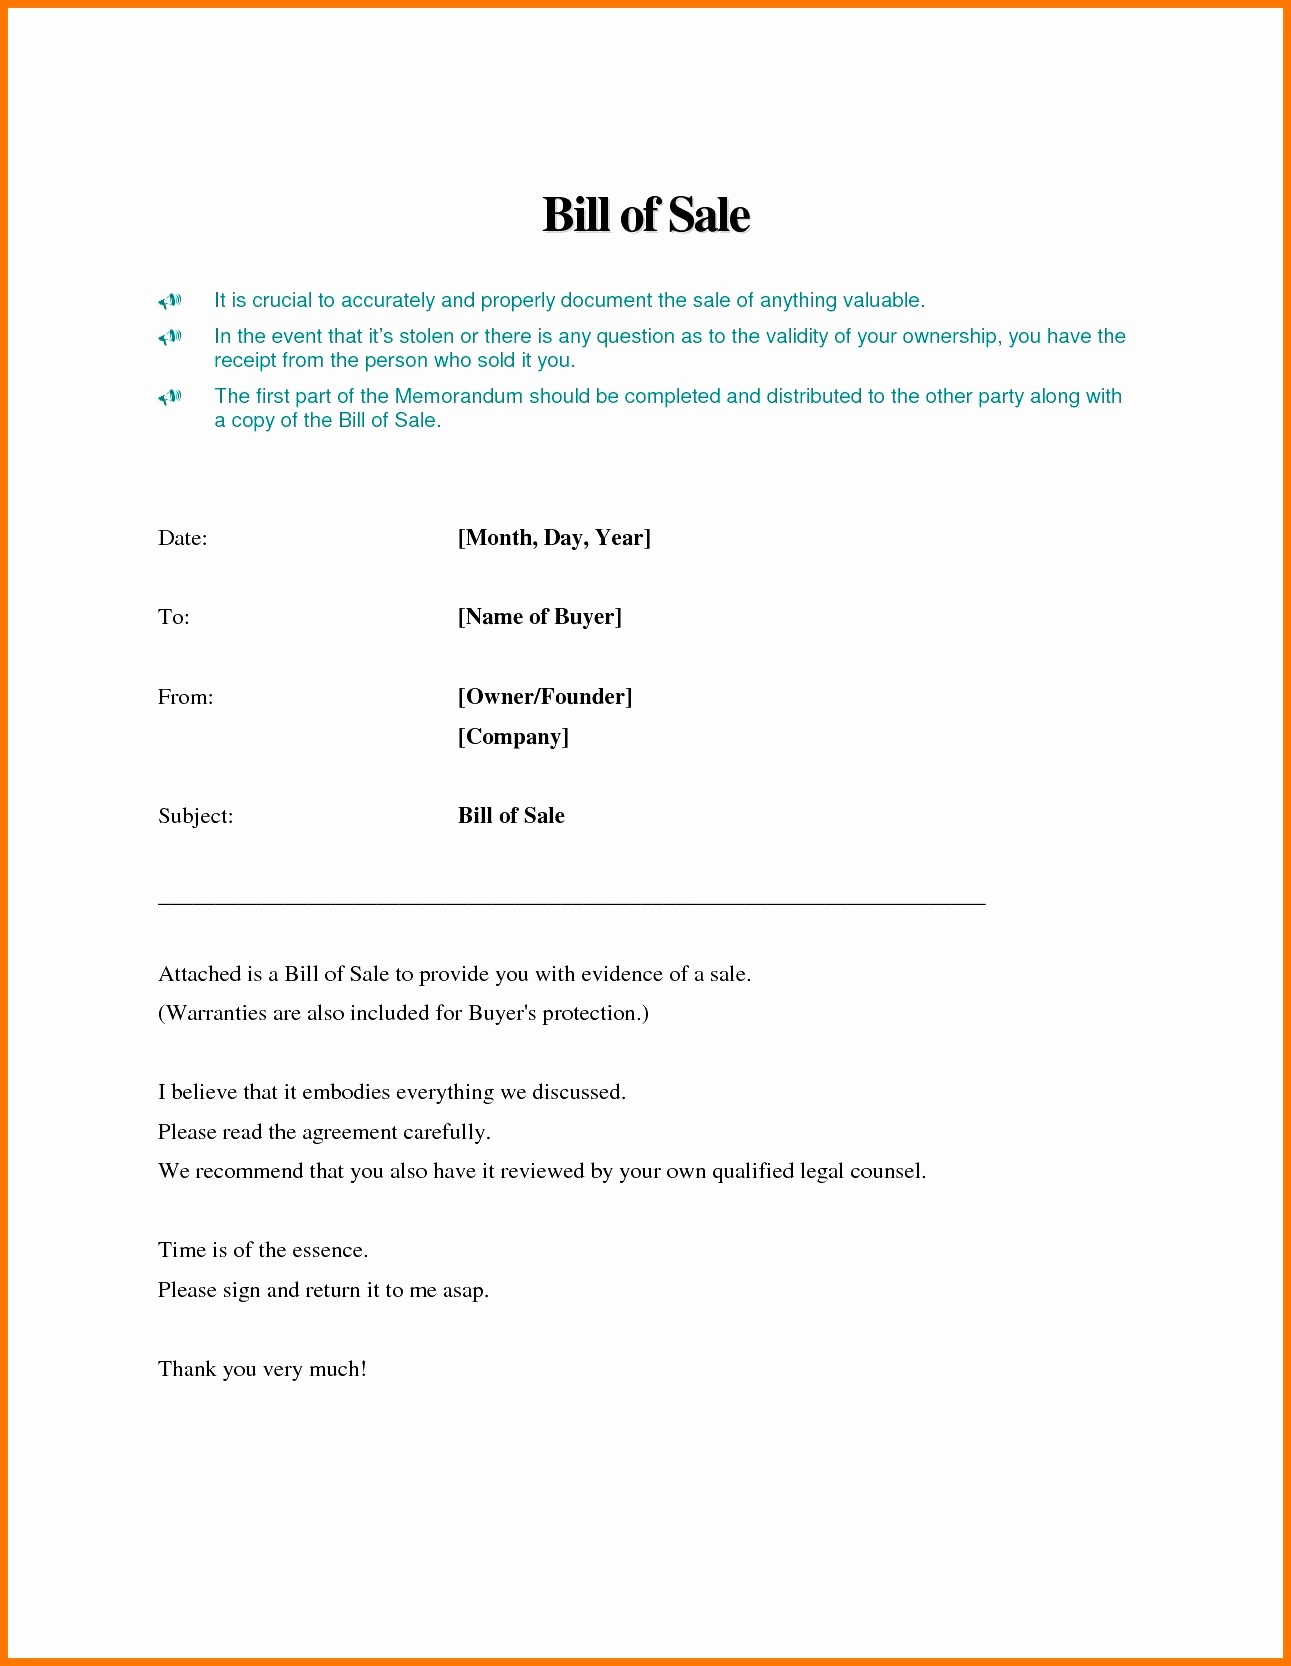 50 New Fake Bill Of Sale DOCUMENT IDEAS